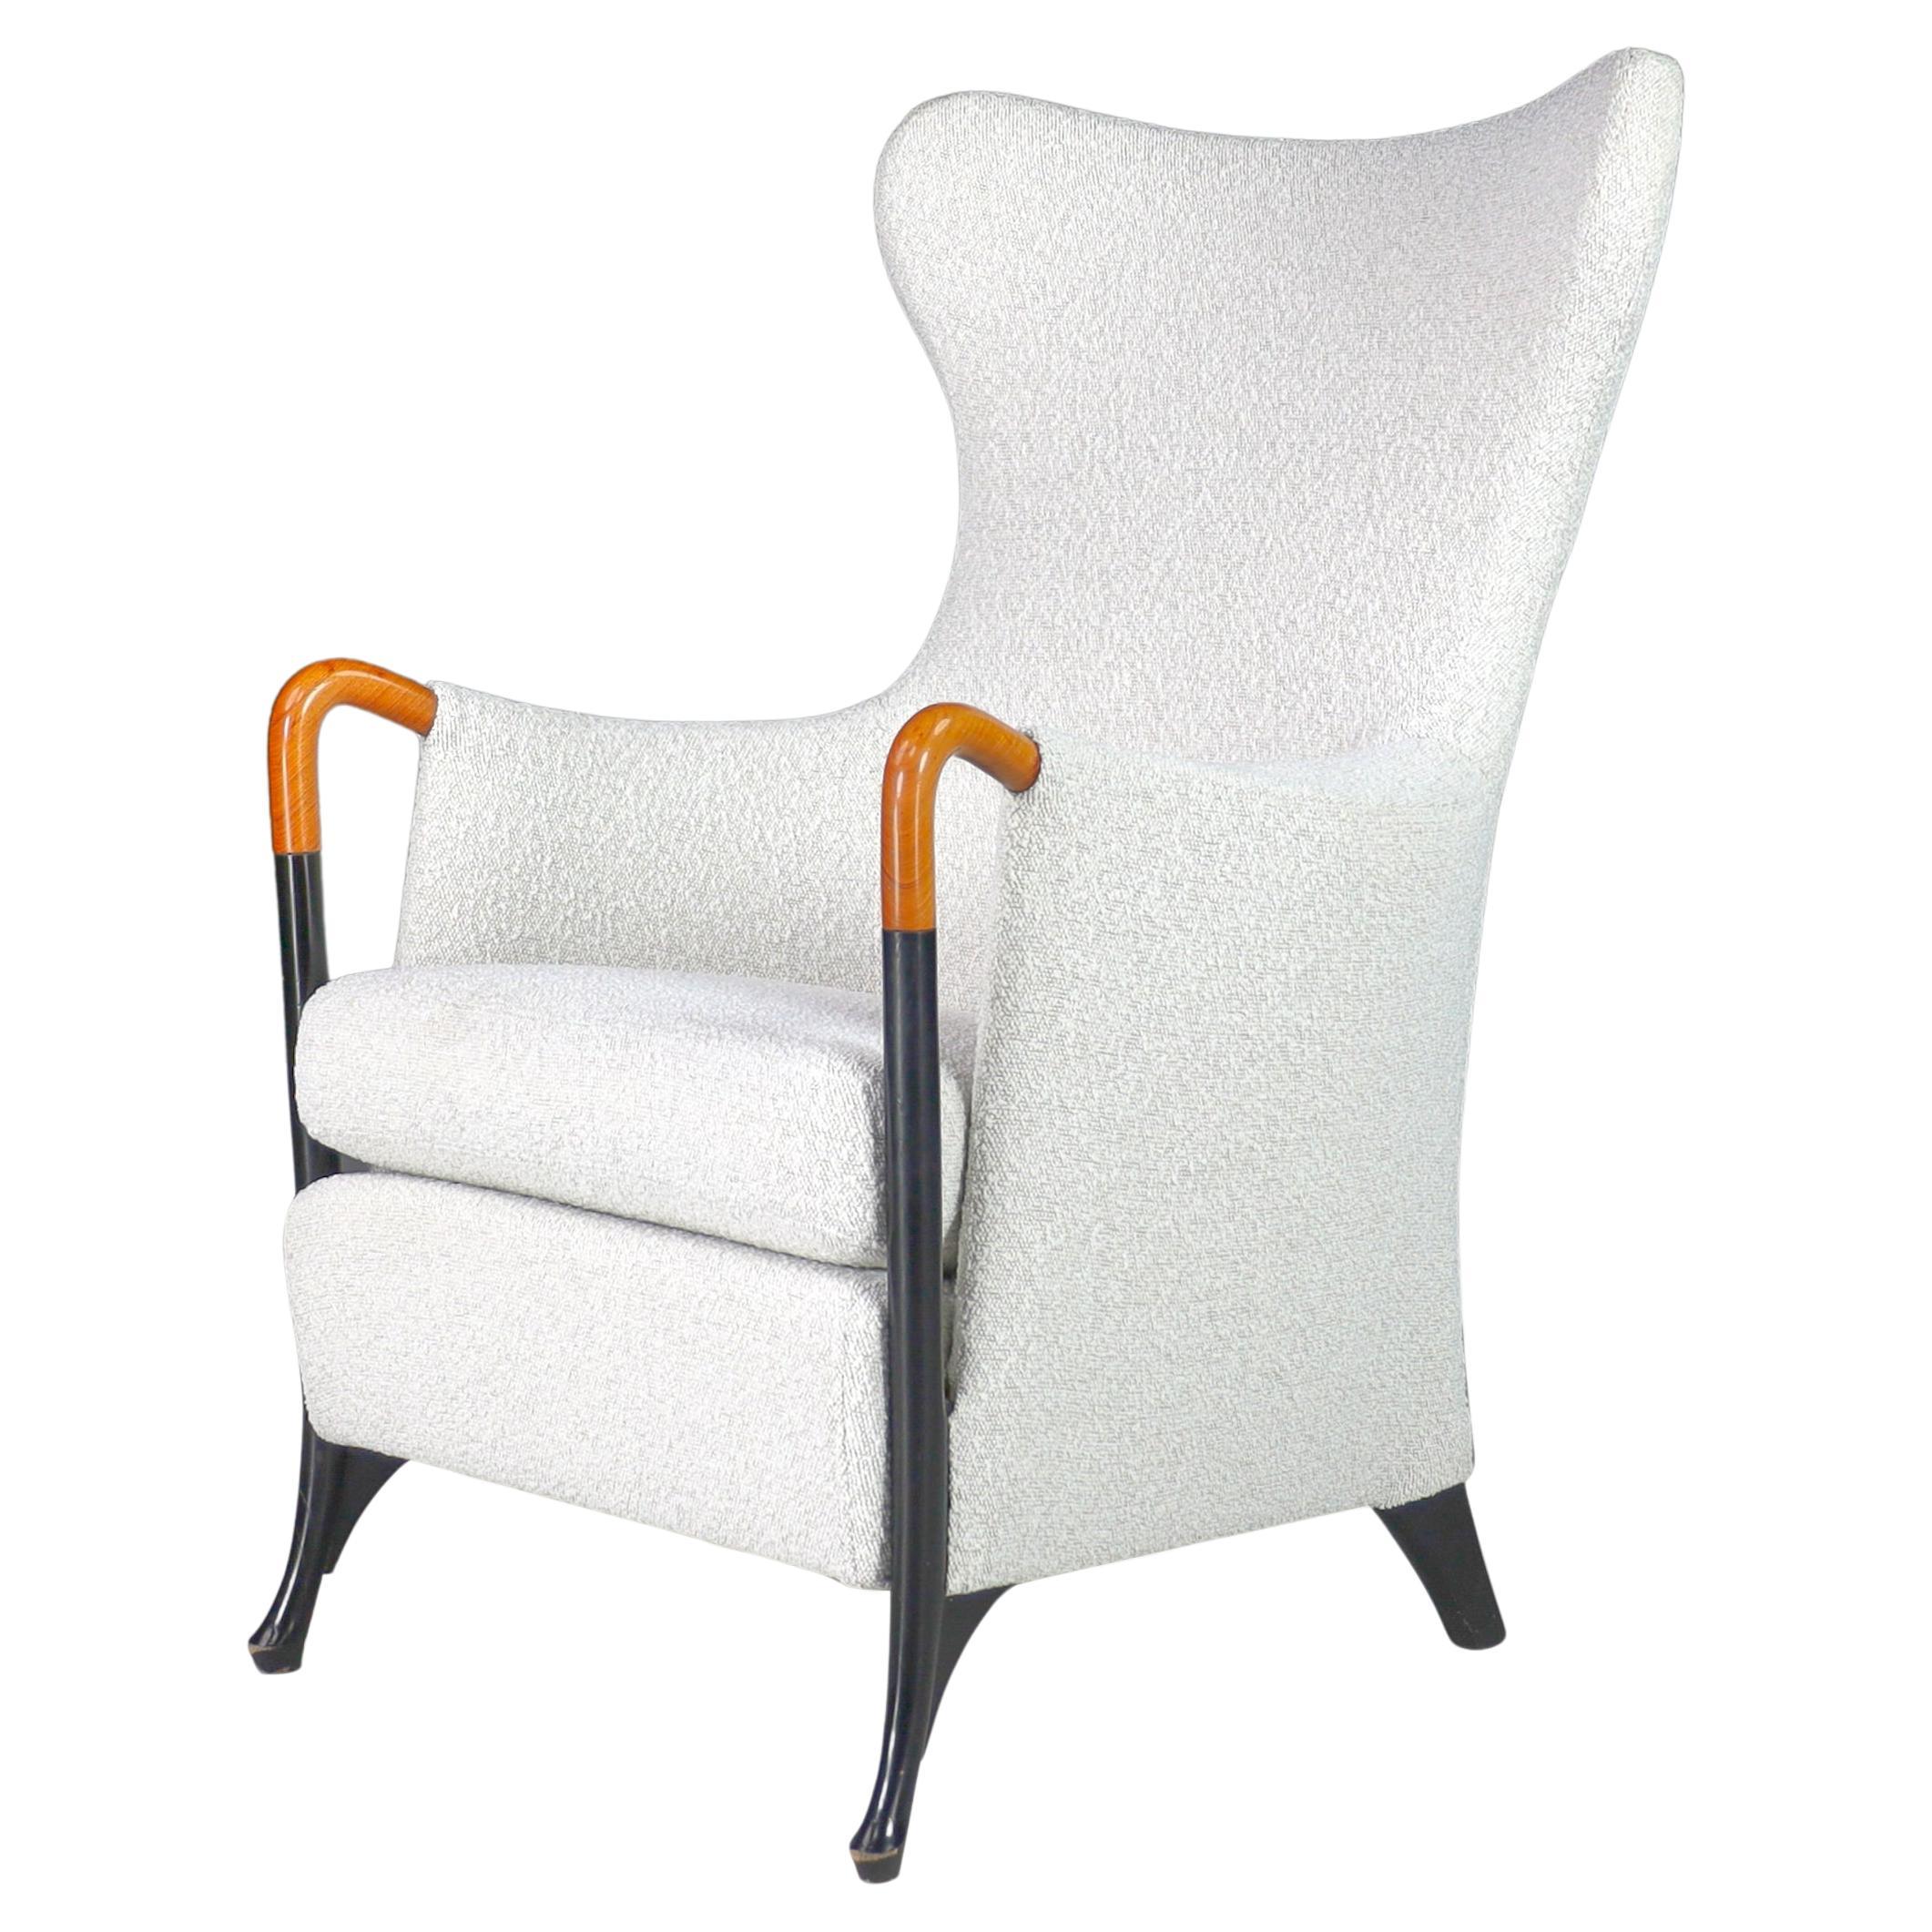 Umberto Asnago Wingback Chairs